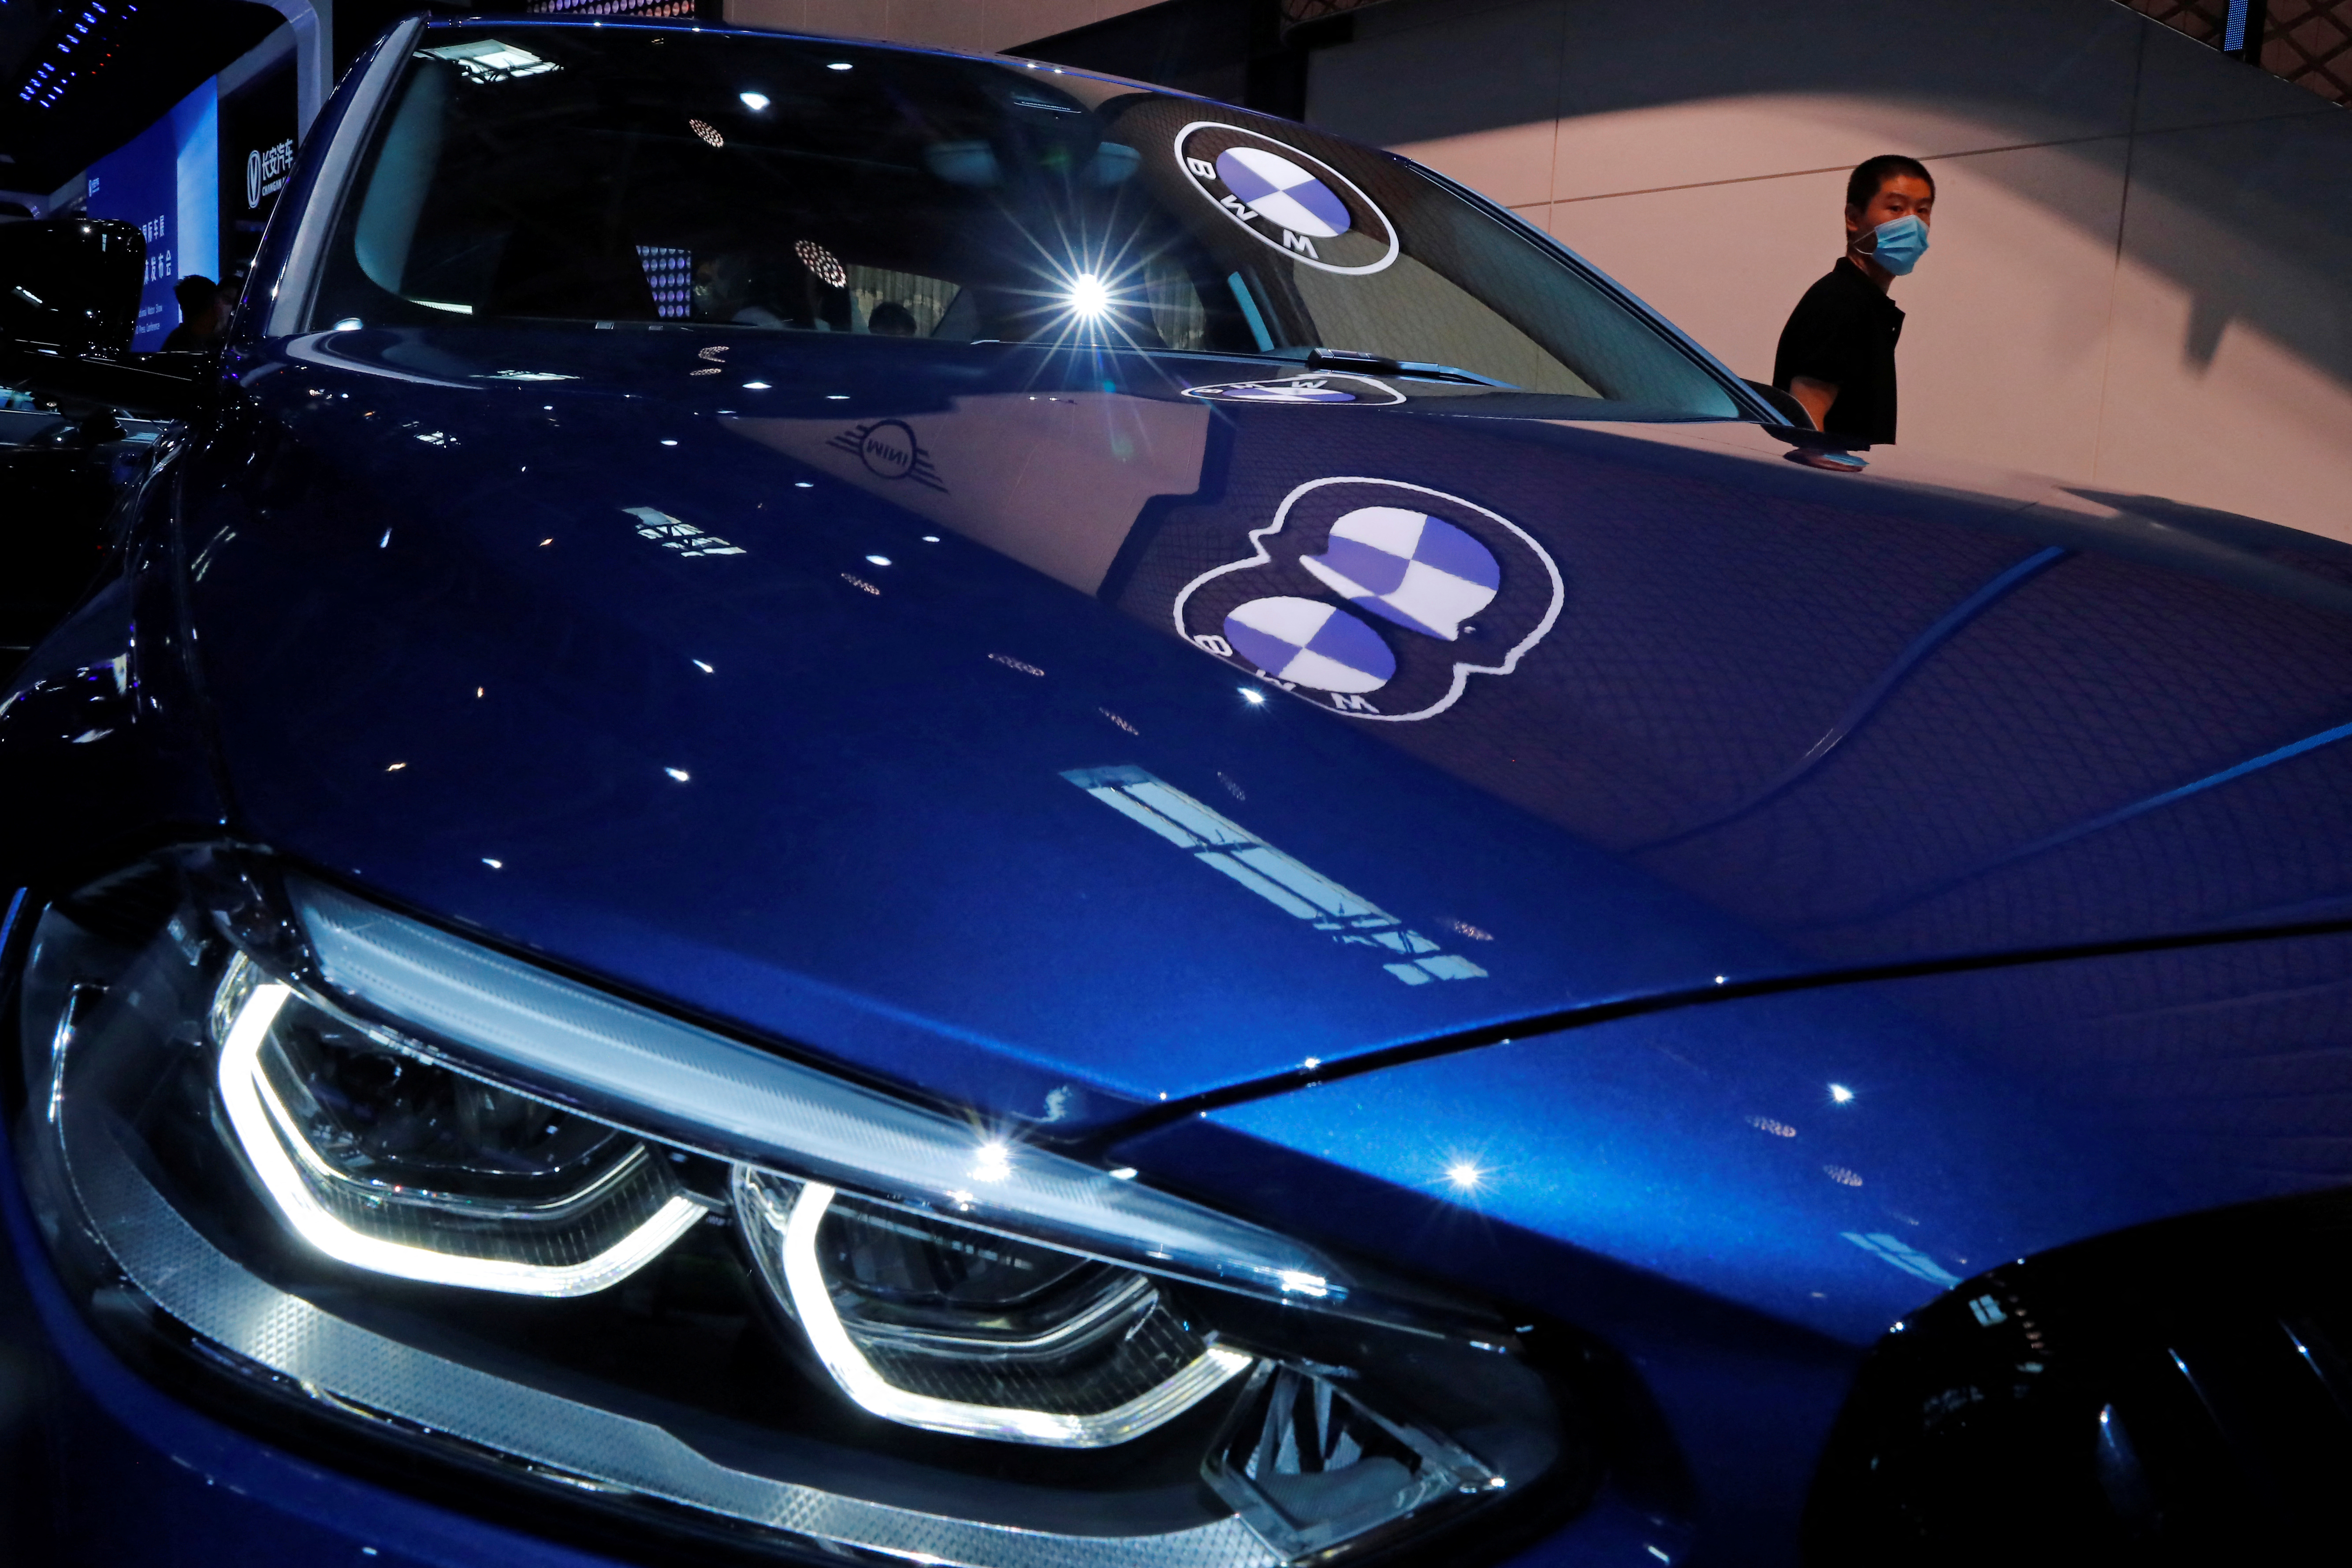 BMW emblems are reflected on the bonnet of a car at the Beijing International Automotive Exhibition, or Auto China show, in Beijing, China September 26, 2020. REUTERS/Thomas Peter